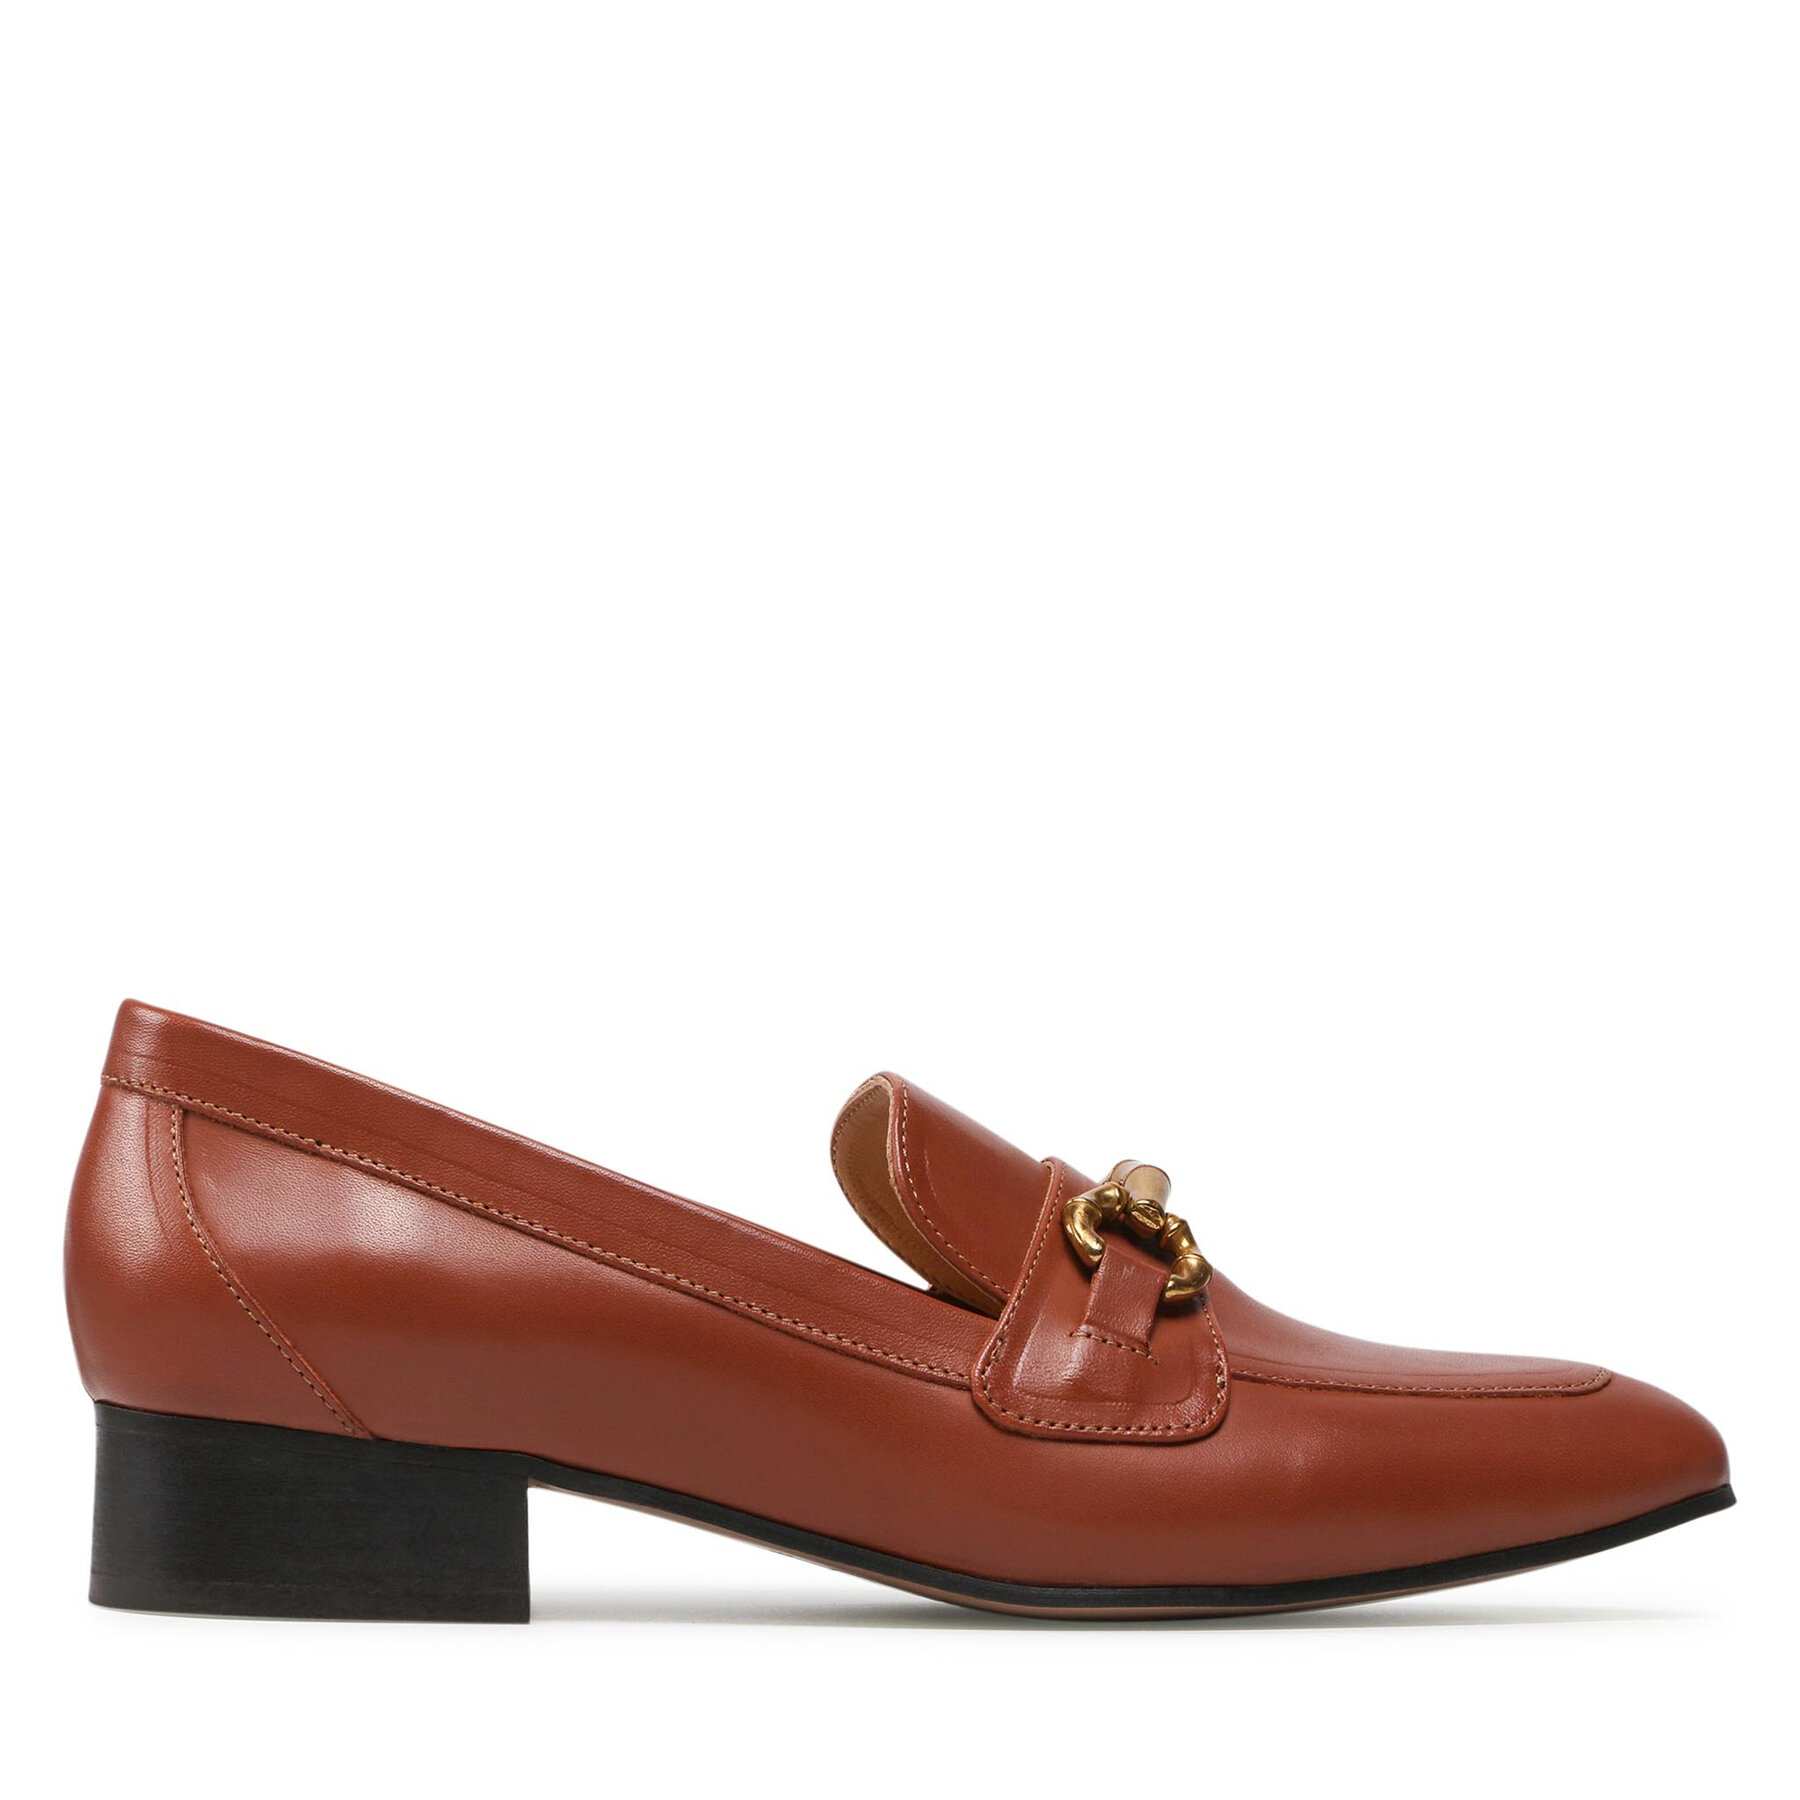 Loaferice Gino Rossi 81200 Camel